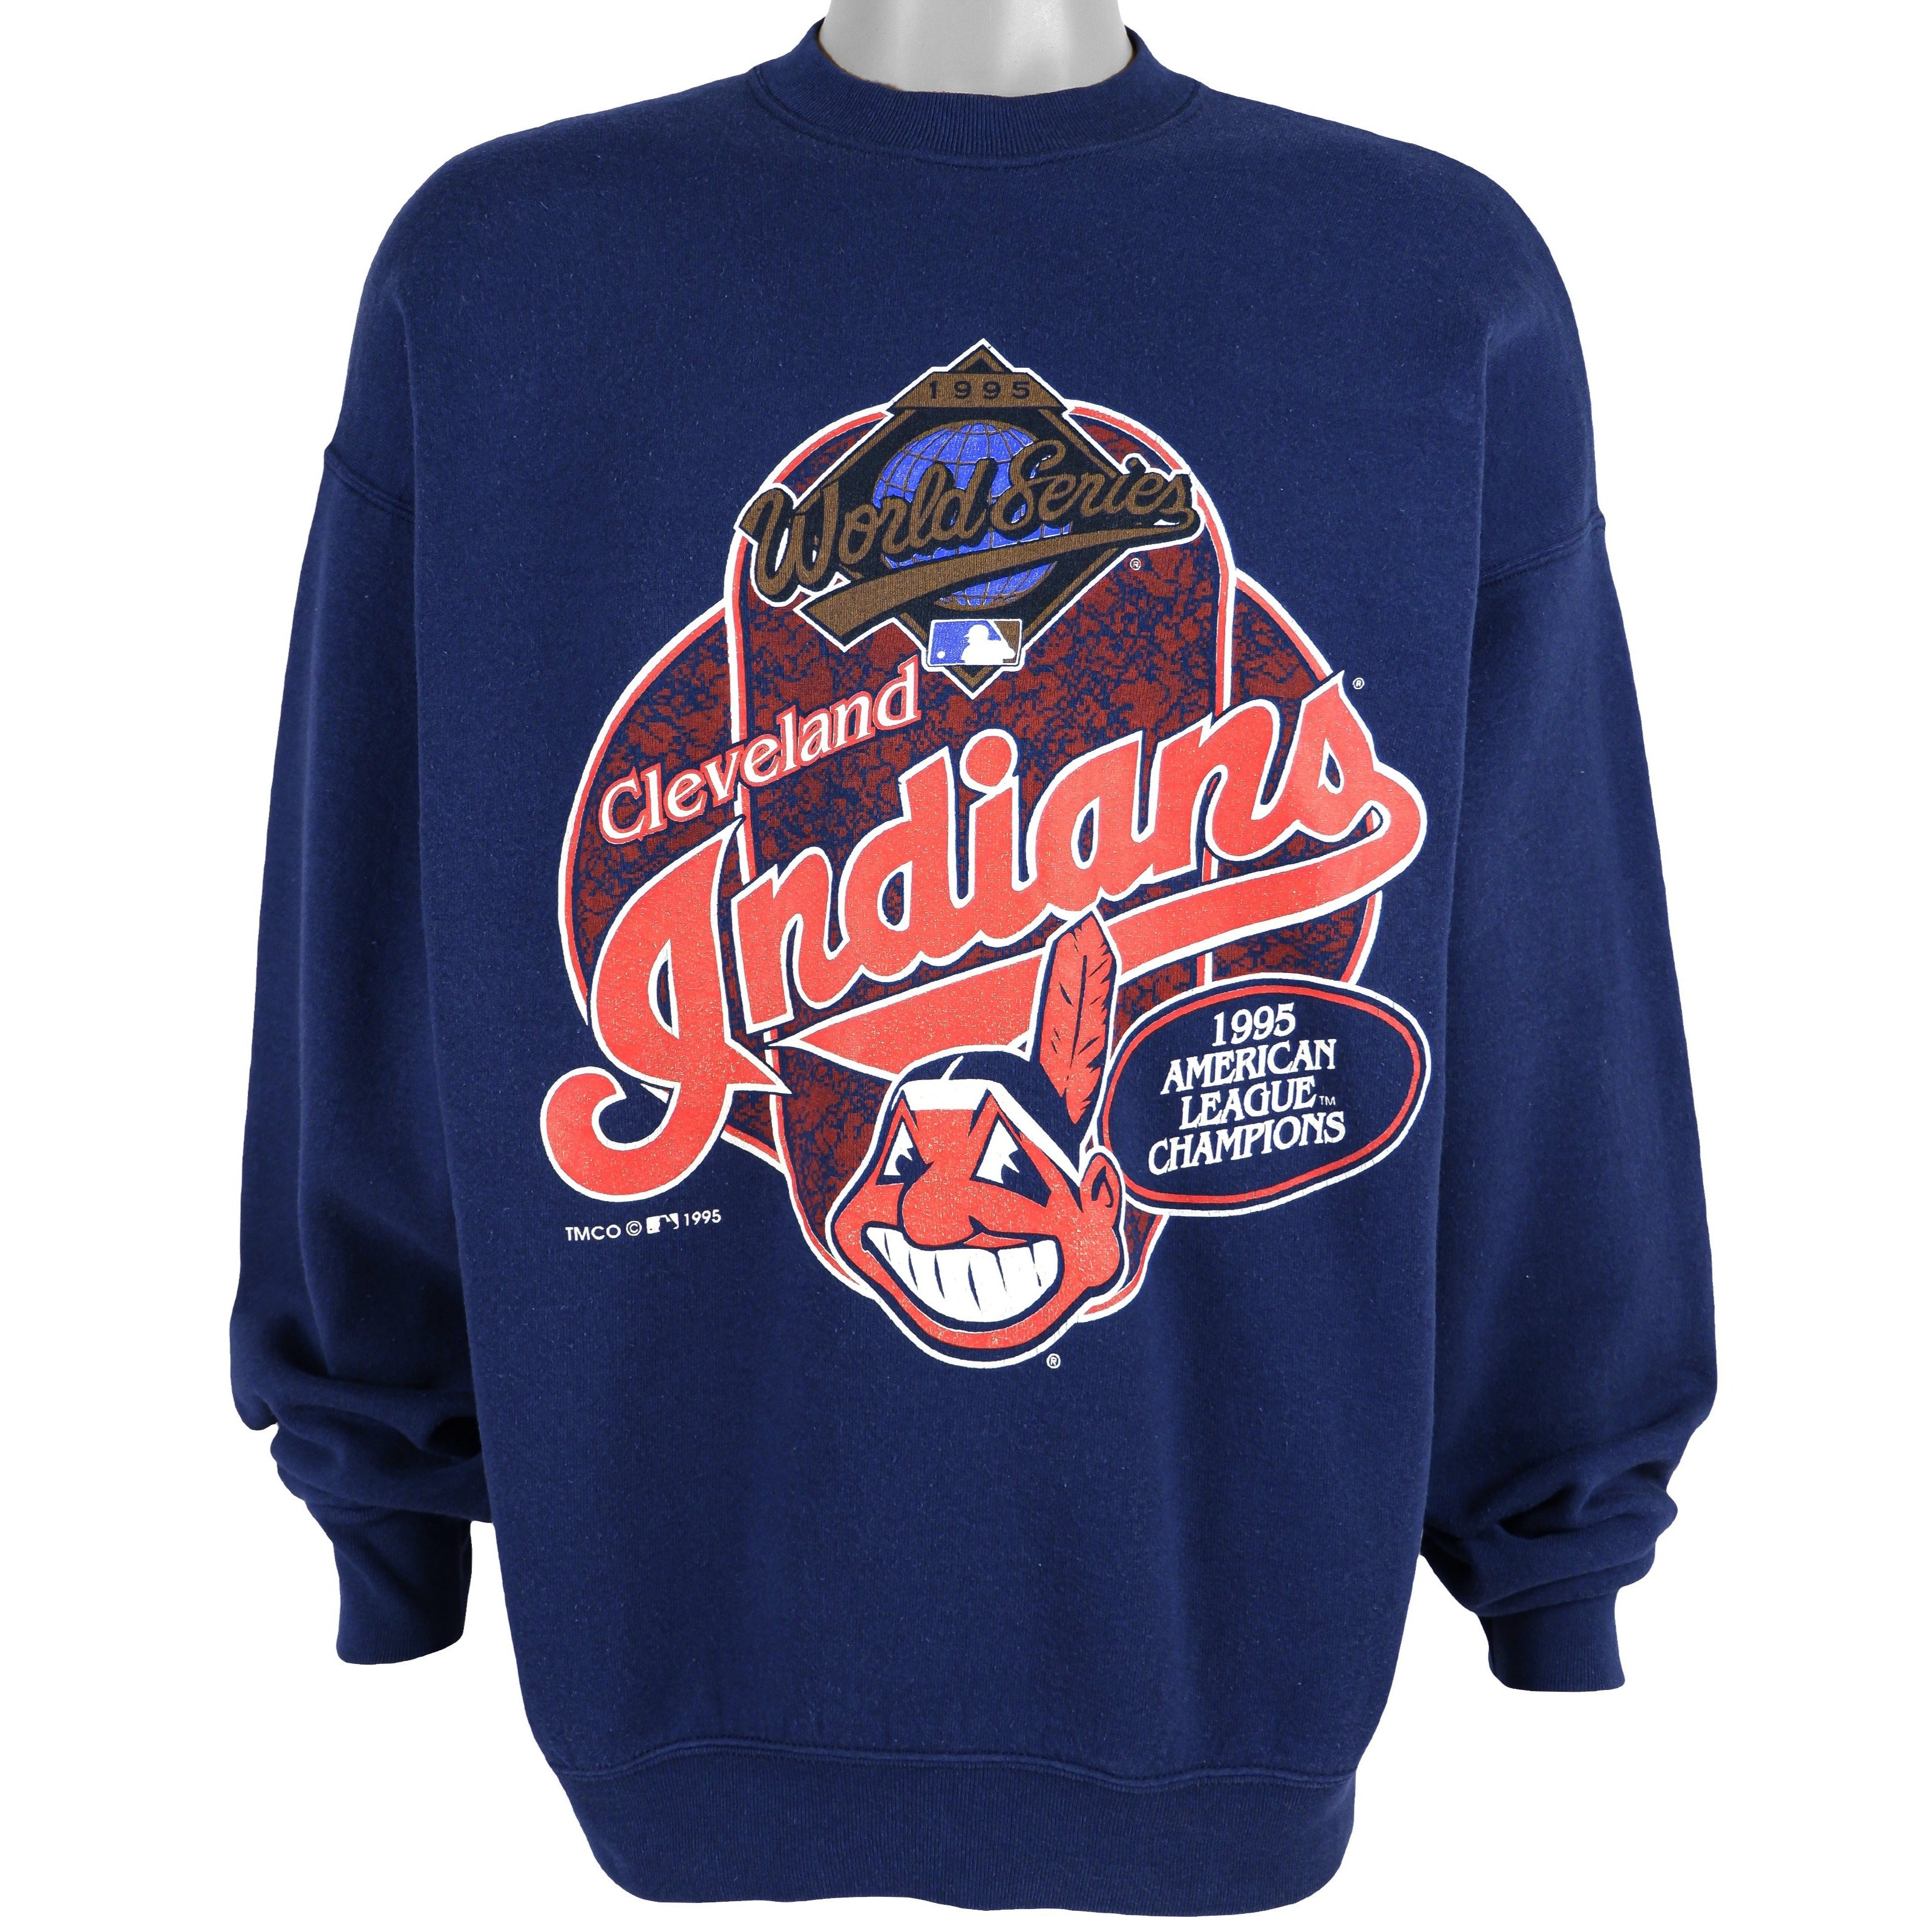 Vintage MLB - Cleveland Indians American League Champions Crew